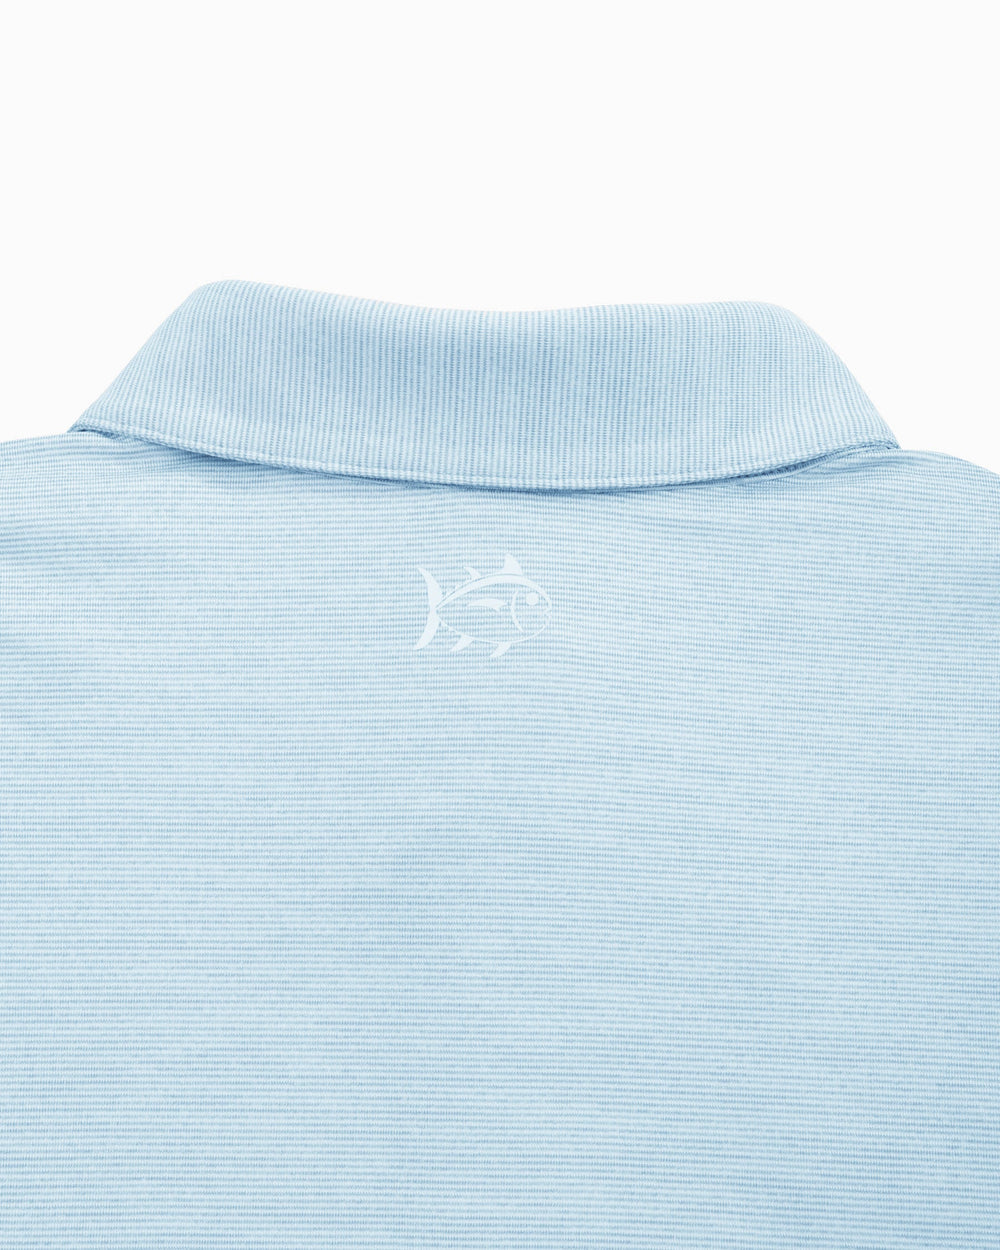 The yoke of the UNC Tar Heels Driver Spacedye Performance Polo Shirt by Southern Tide - Rush Blue